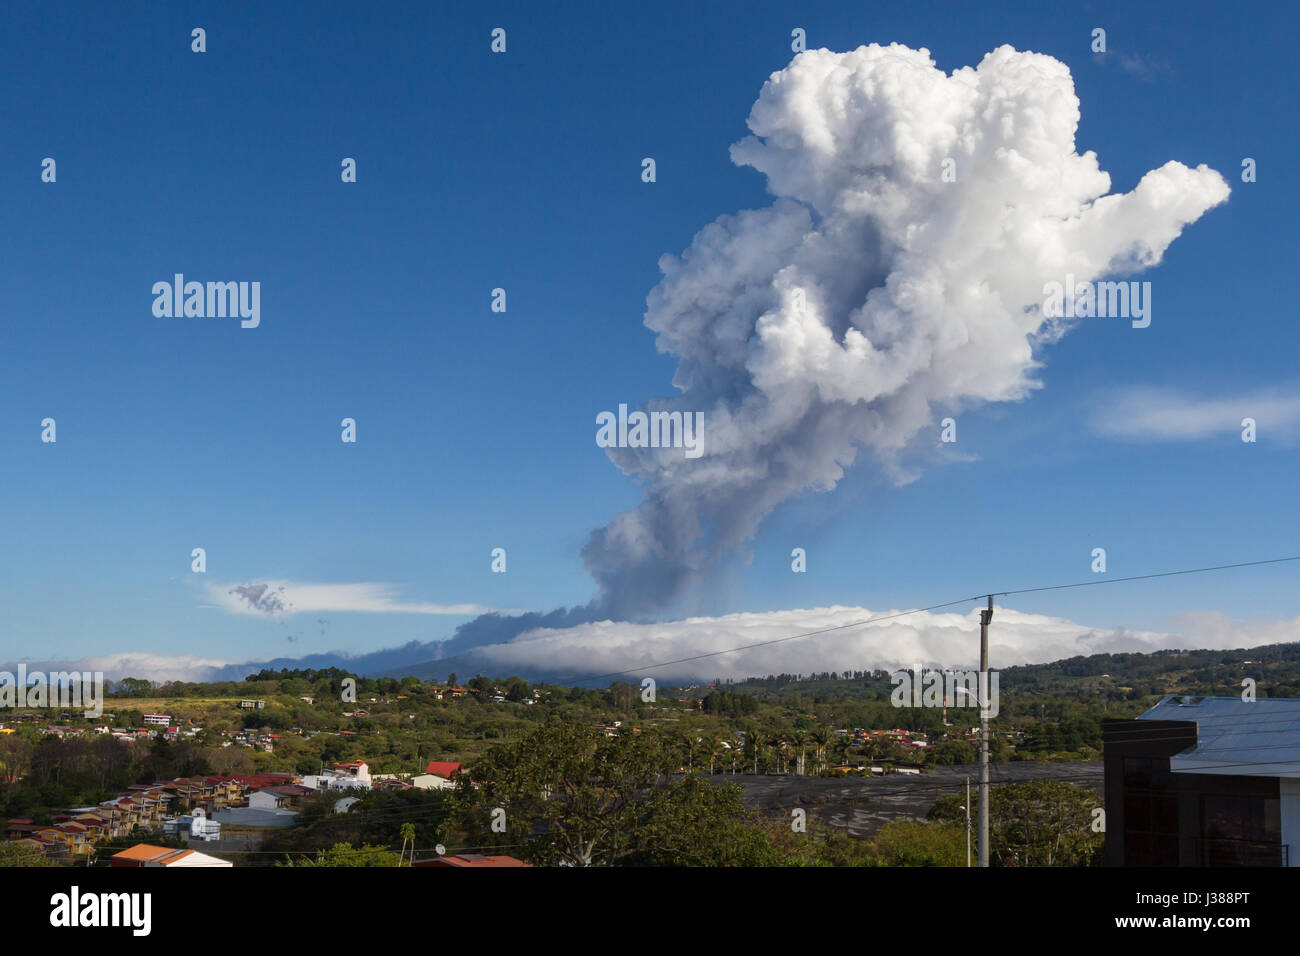 Heredia, Costa Rica - April 14: Plum of steam and ash from volcanic activity towering above the Poas Volcano and surrounding neighborhoods. April 14 2 Stock Photo